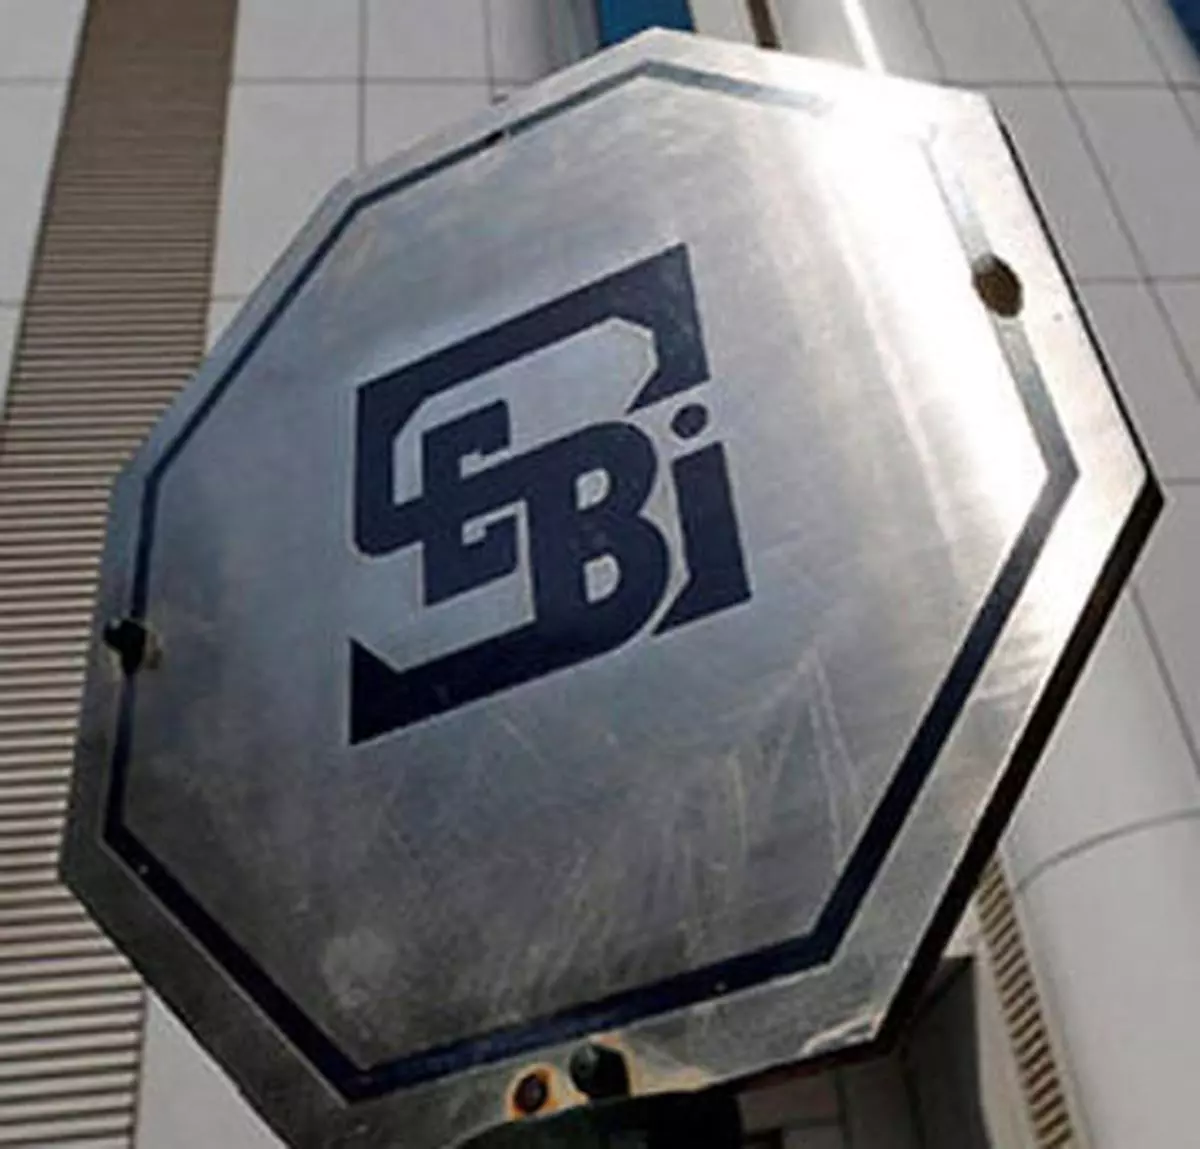 The regulator SEBI has asked all AIFs and VCFs to make disclosure in specified format of all overseas investments sold/divested by them till date, within 30 days